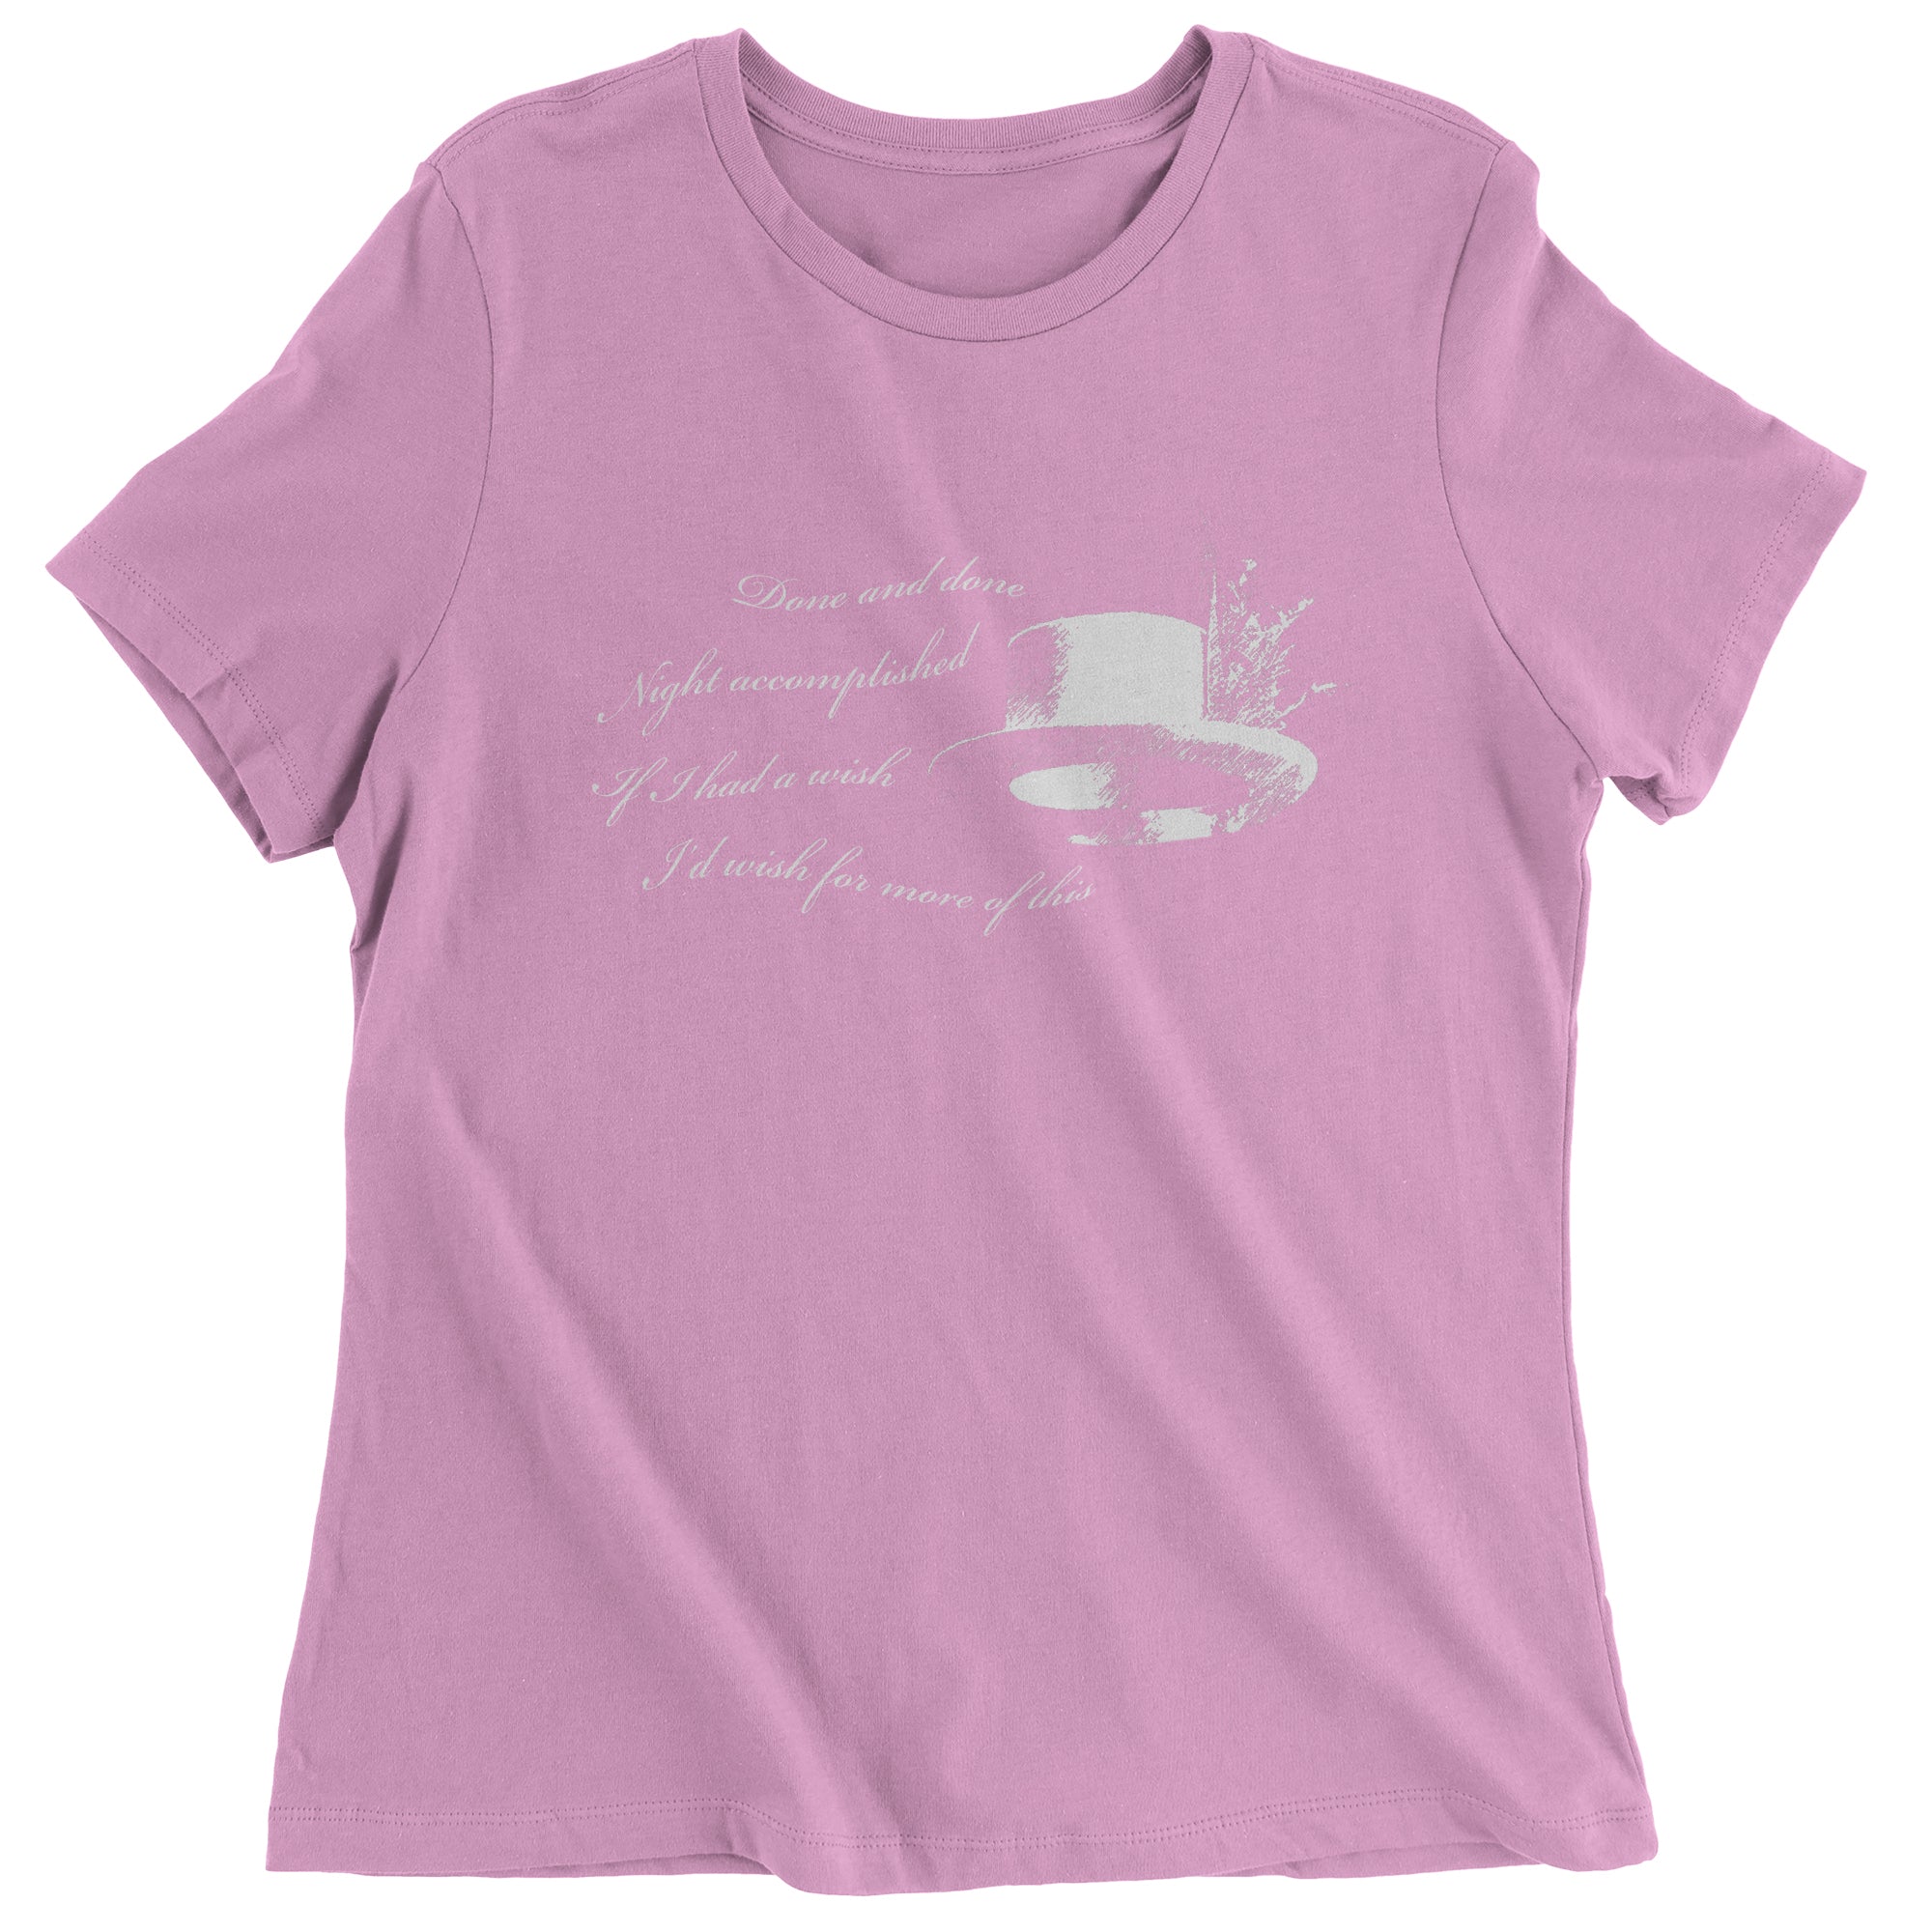 Done and Done Women's T-Shirt